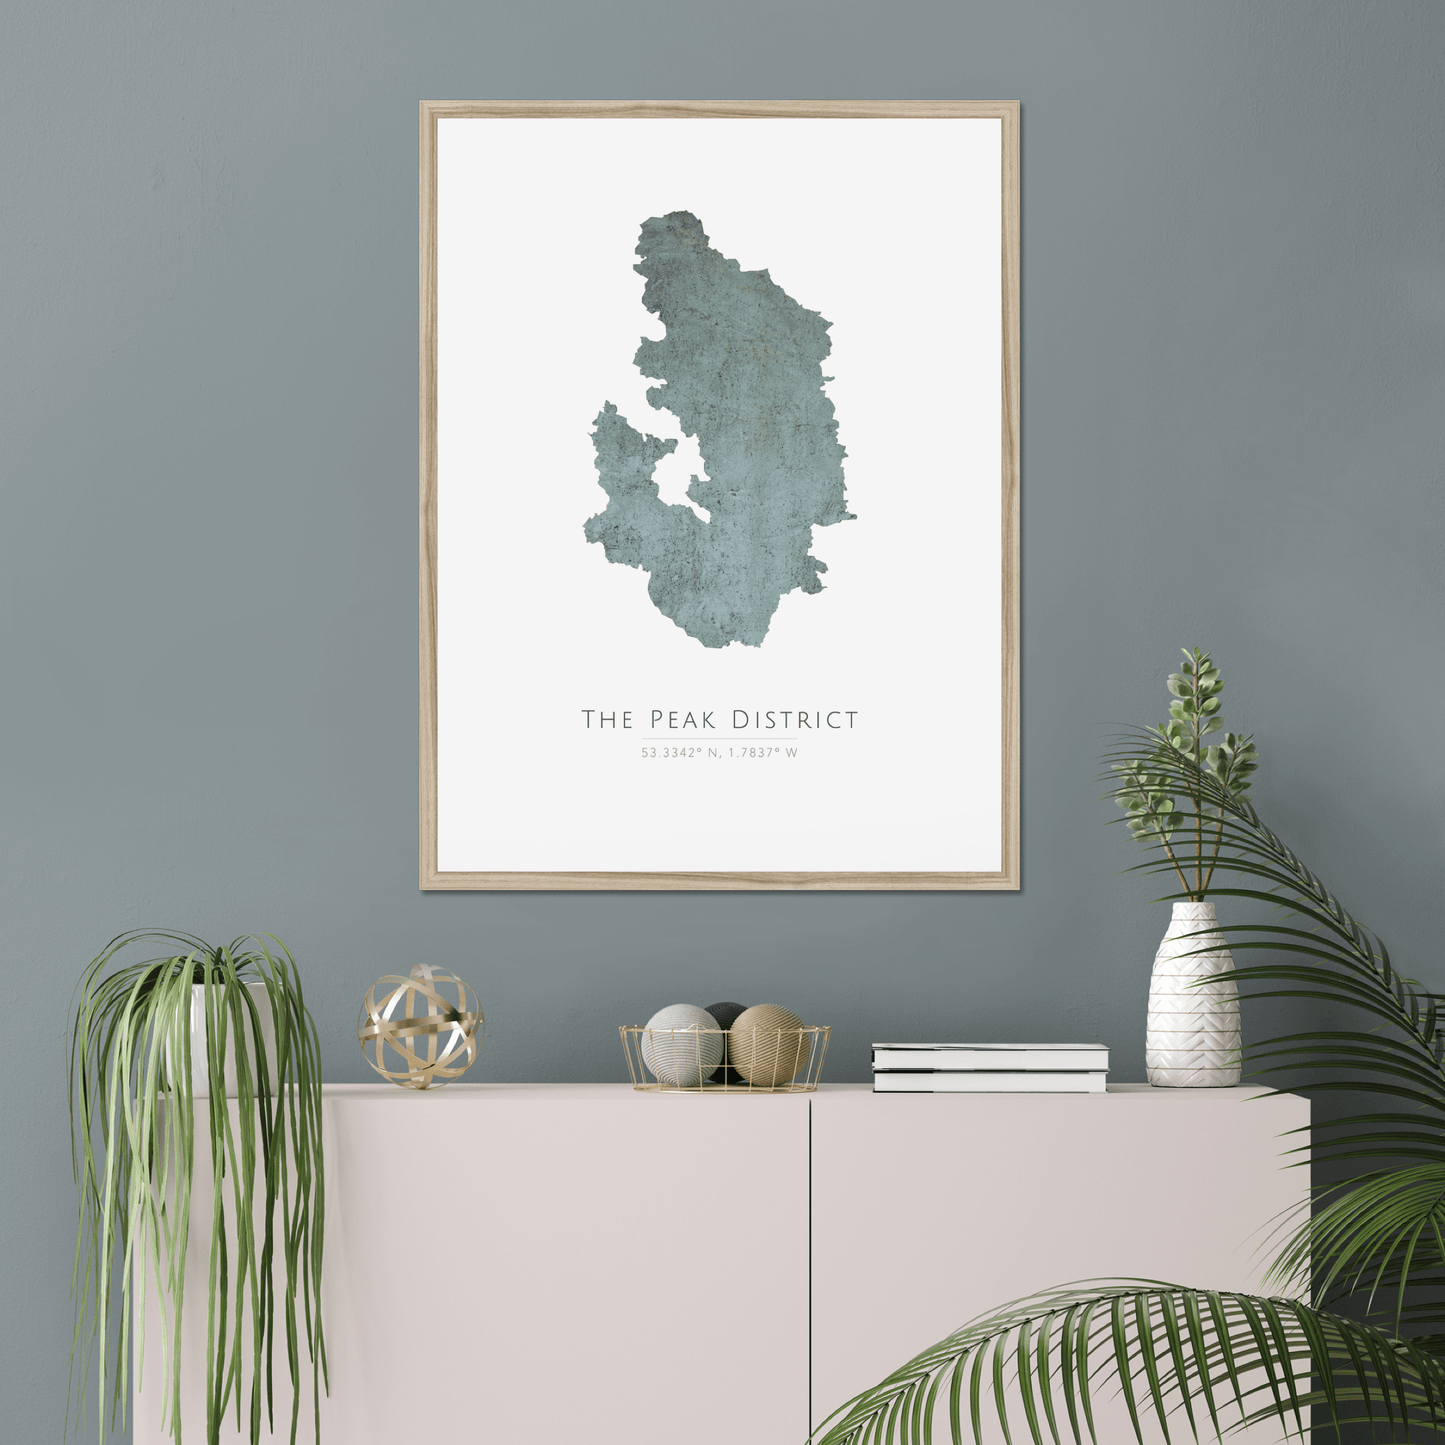 The Peak District -  Framed & Mounted Map